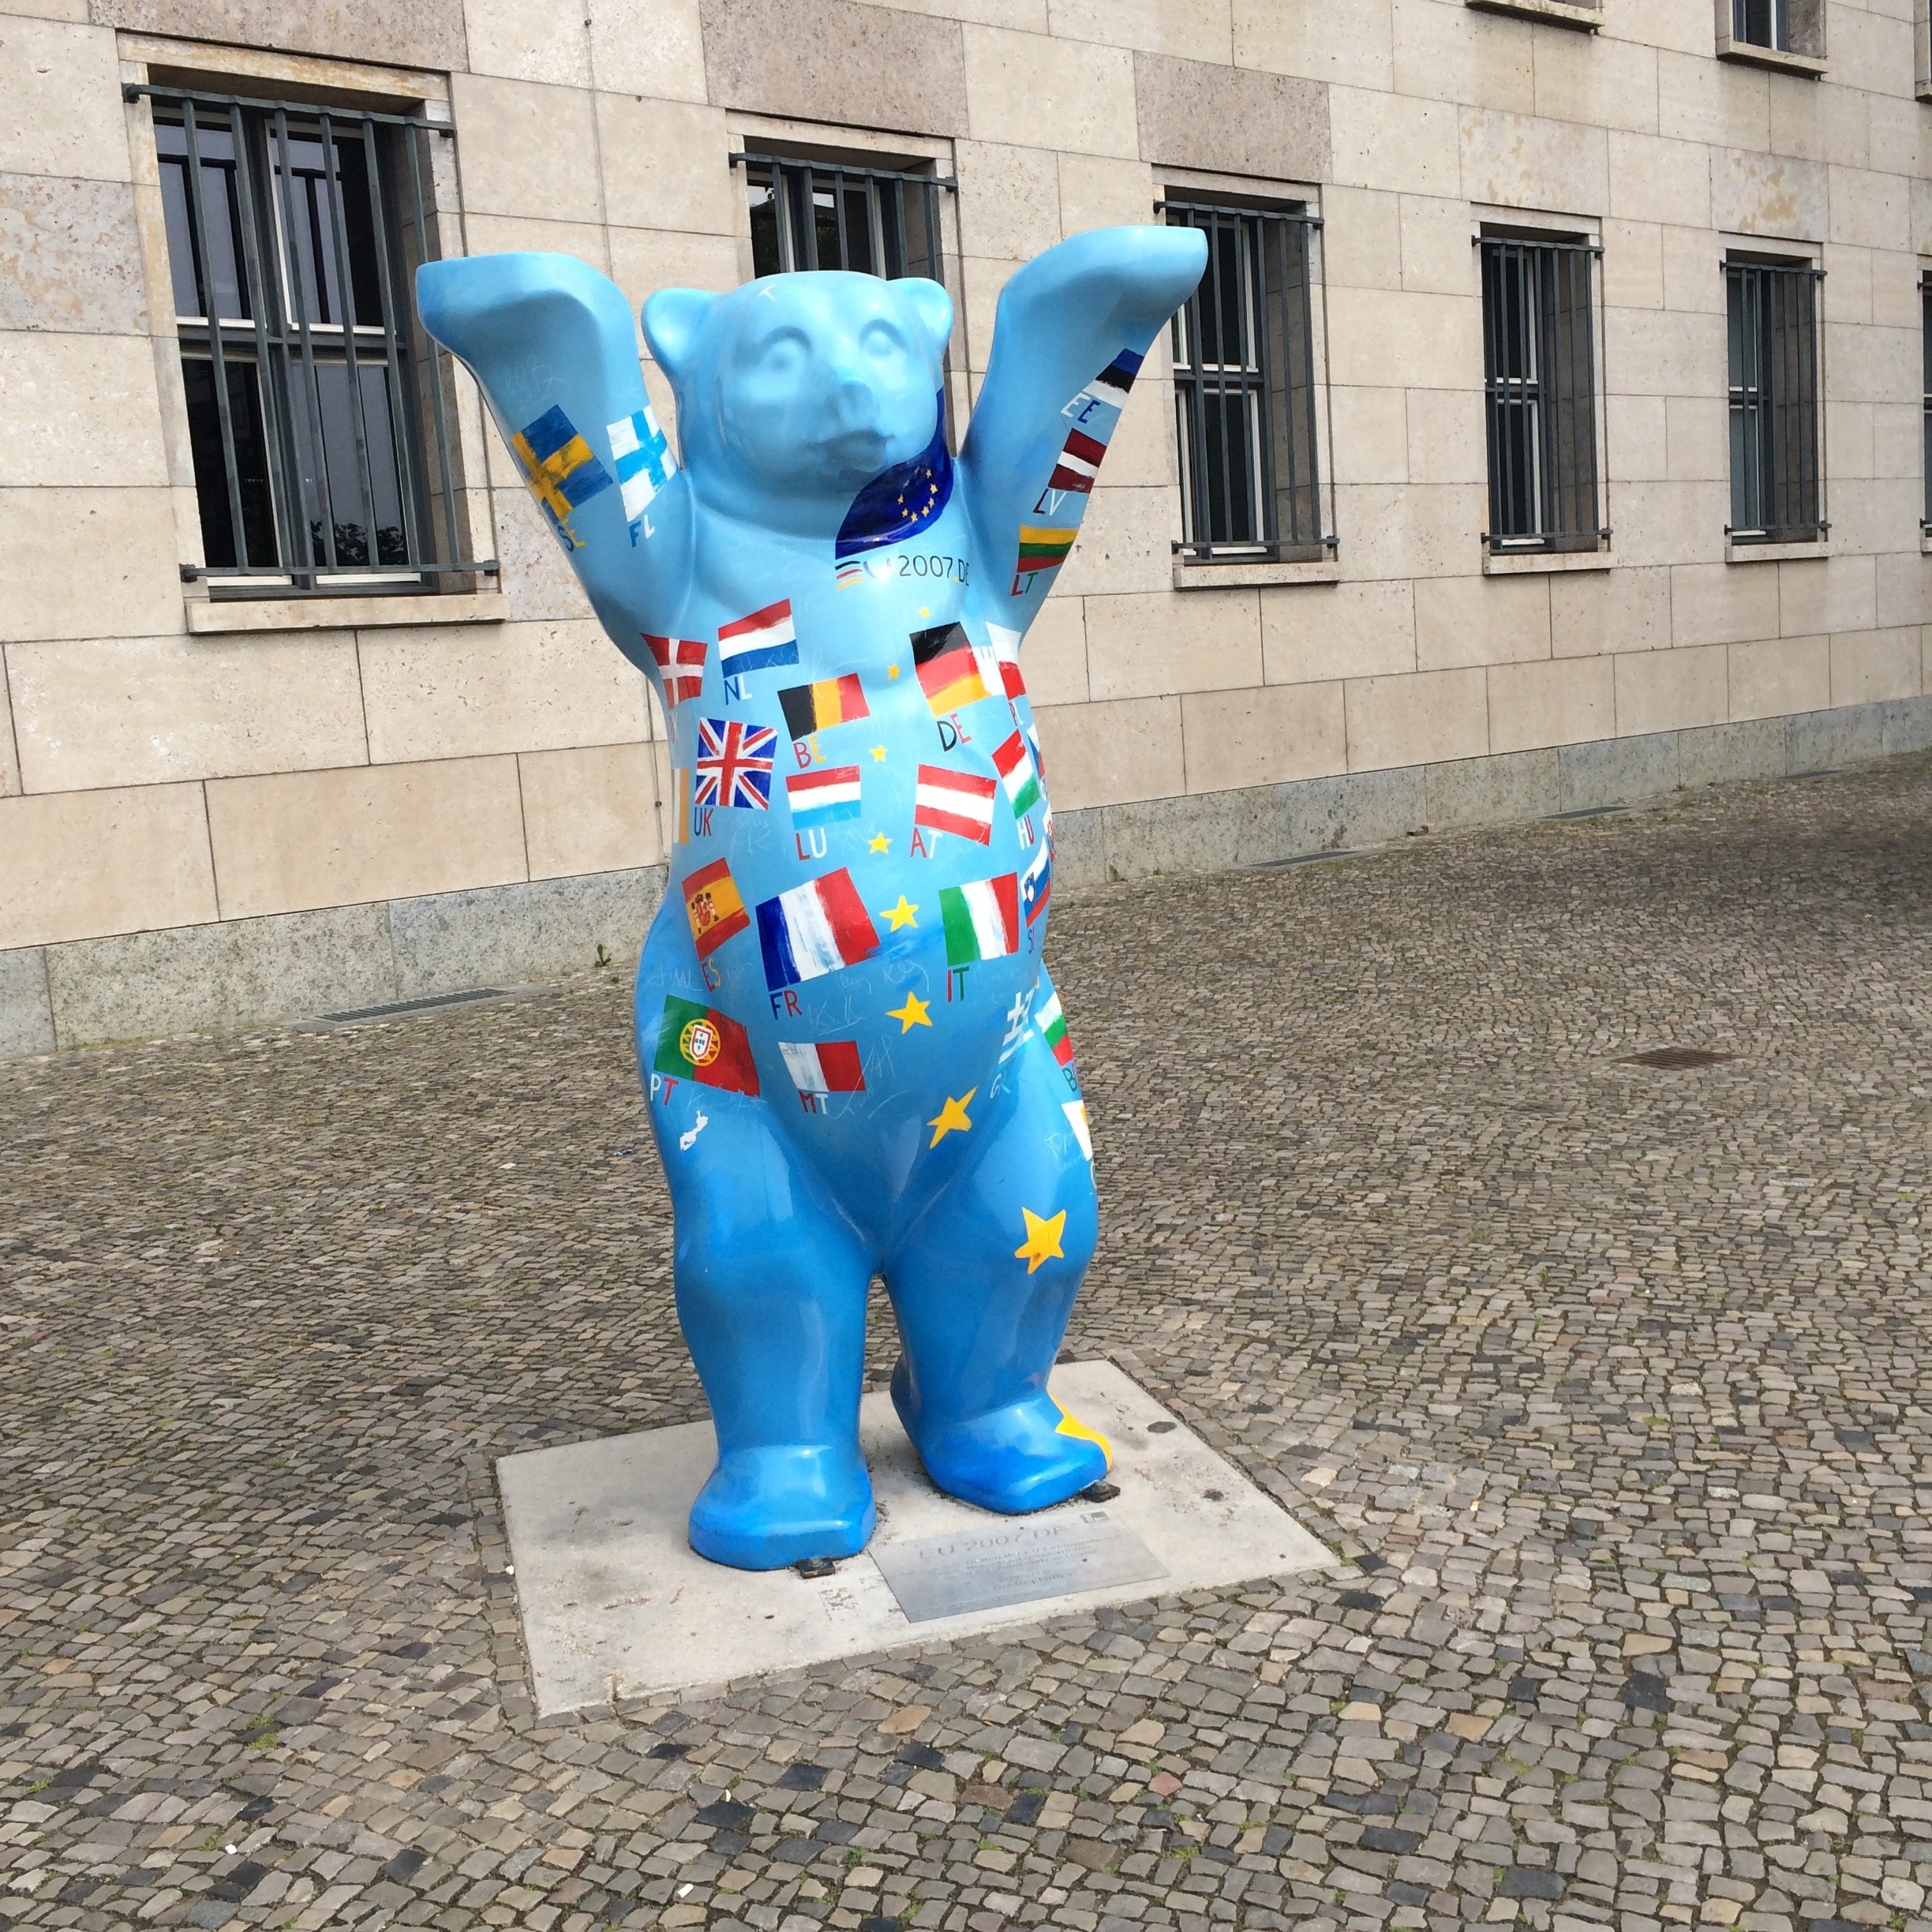 The signature bears placed all around berlin 